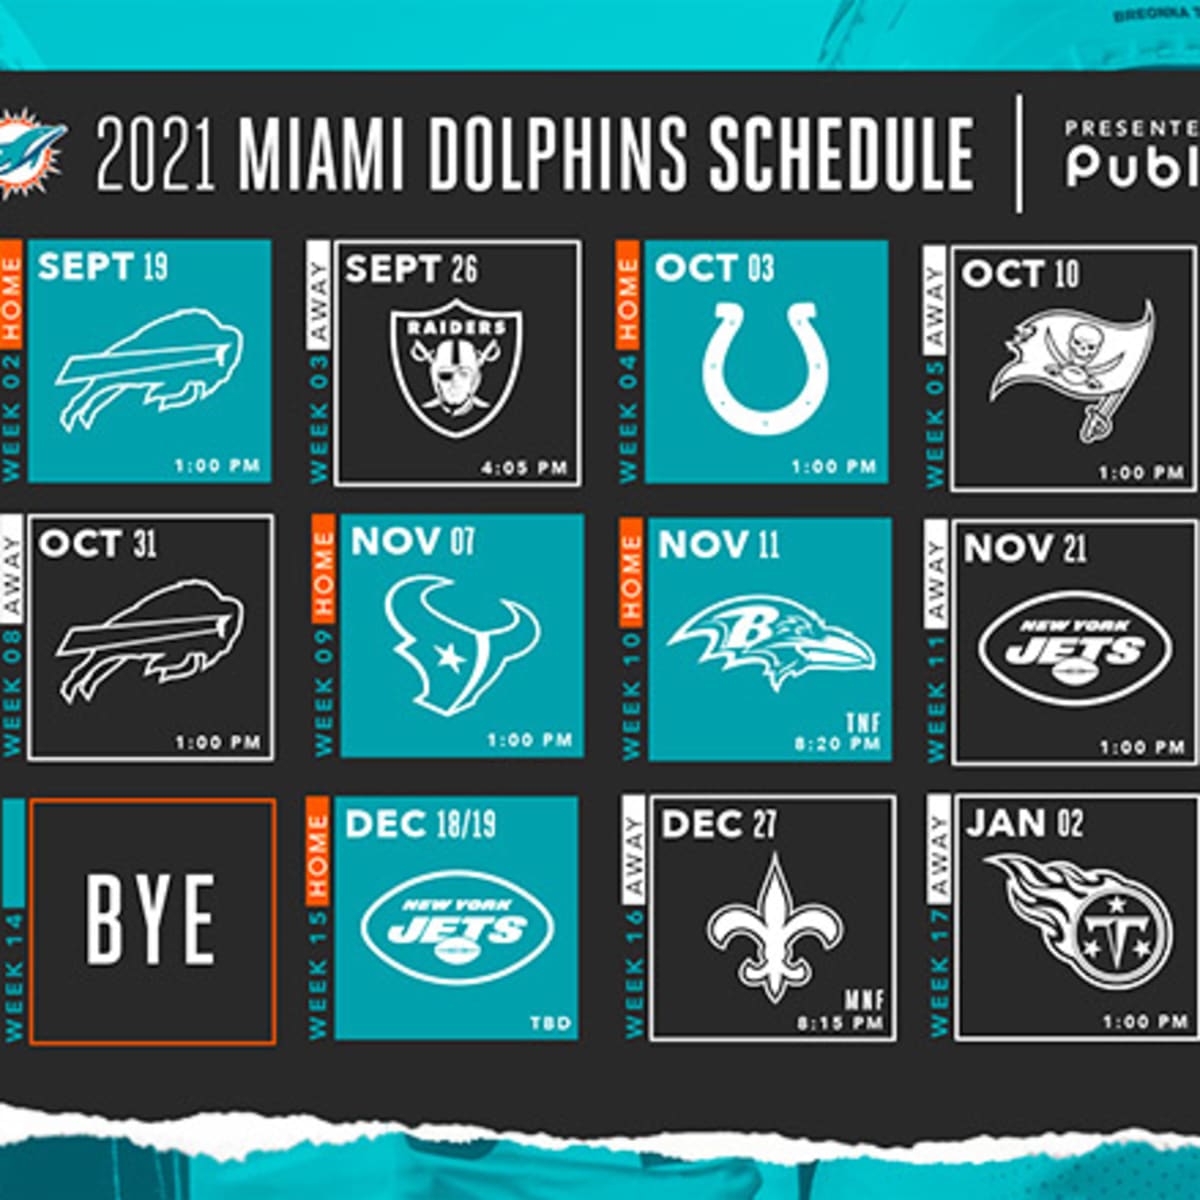 Miami Dolphins Schedule 2022 Printable Miami Dolphins Schedule 2021 - Athlonsports.com | Expert Predictions,  Picks, And Previews